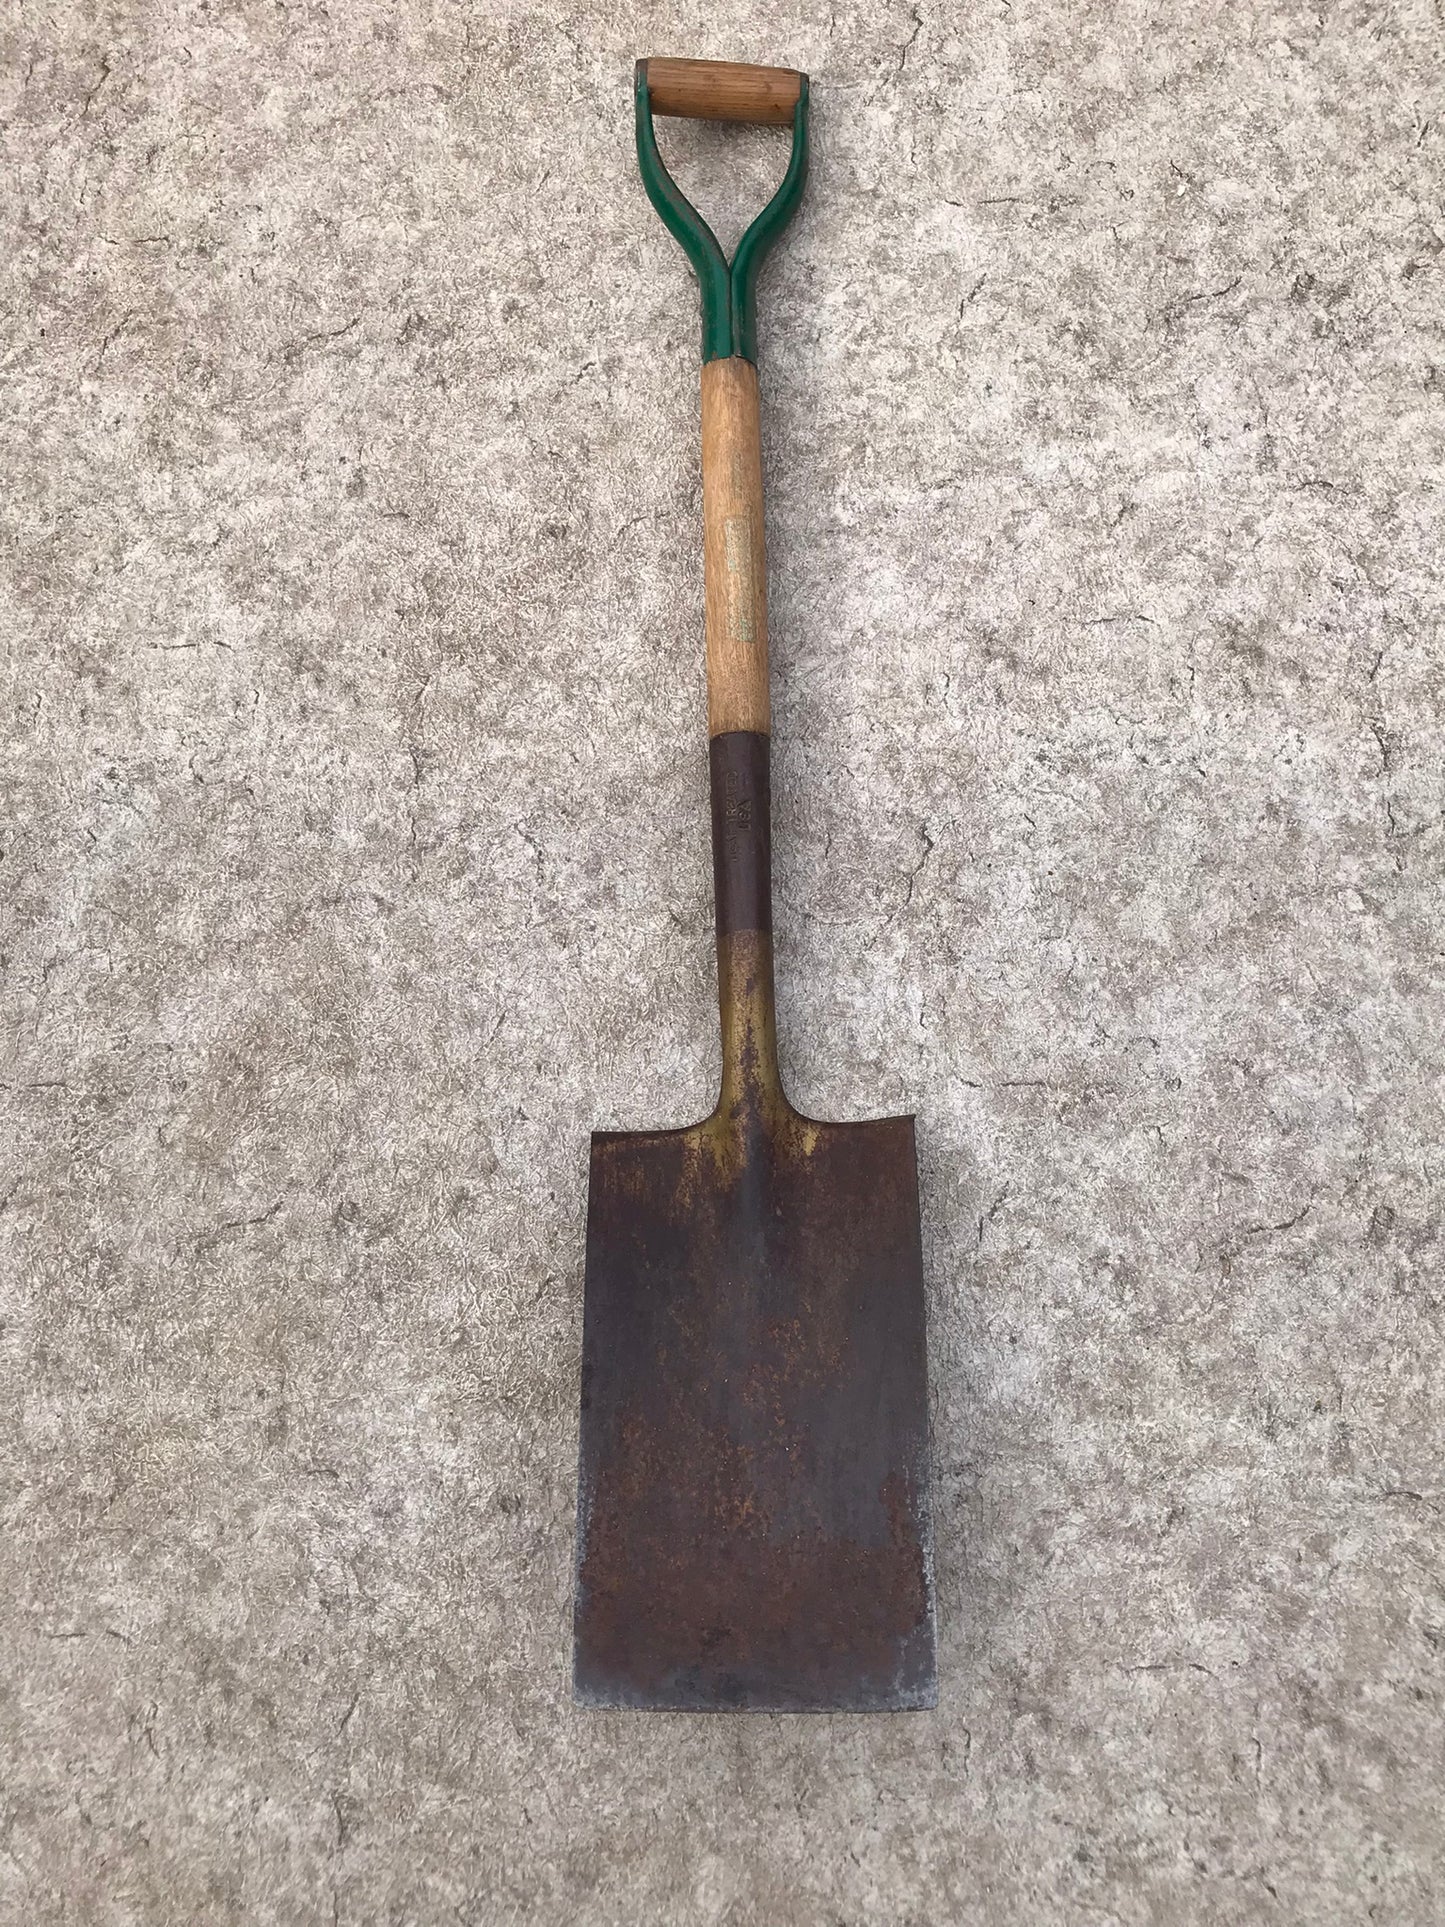 Farm and Garden Heavy Duty Flat End Green Shovel Excellent Quality 40 inch Long